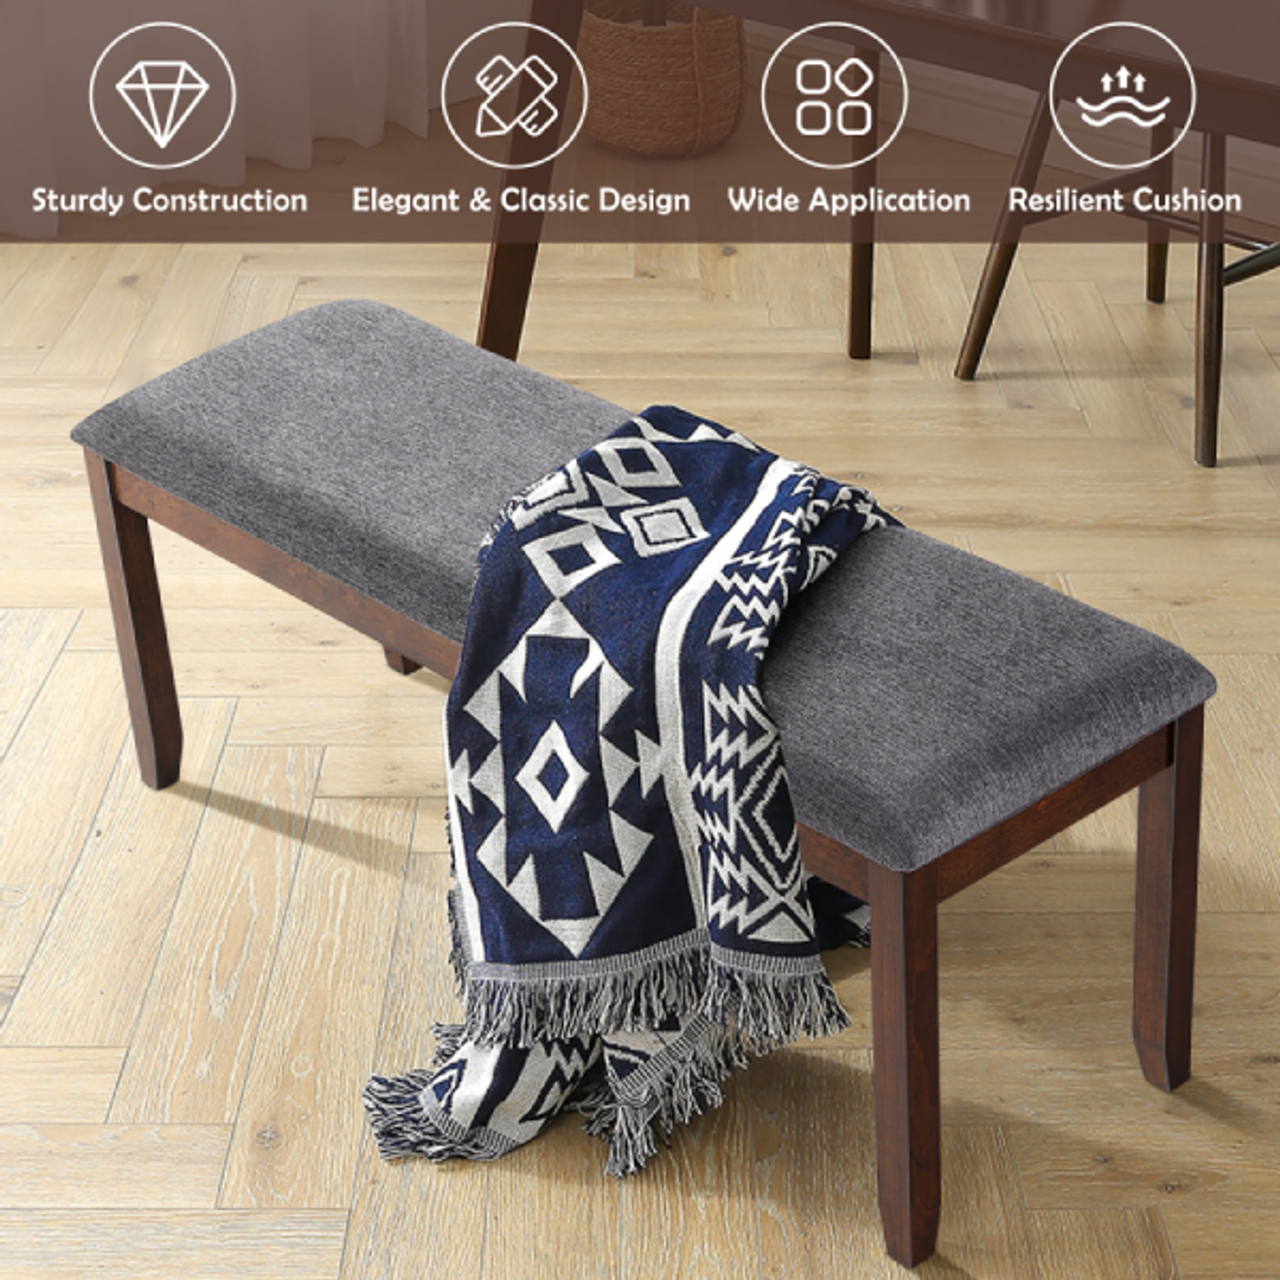 Upholstered Wood Entryway Bench product image